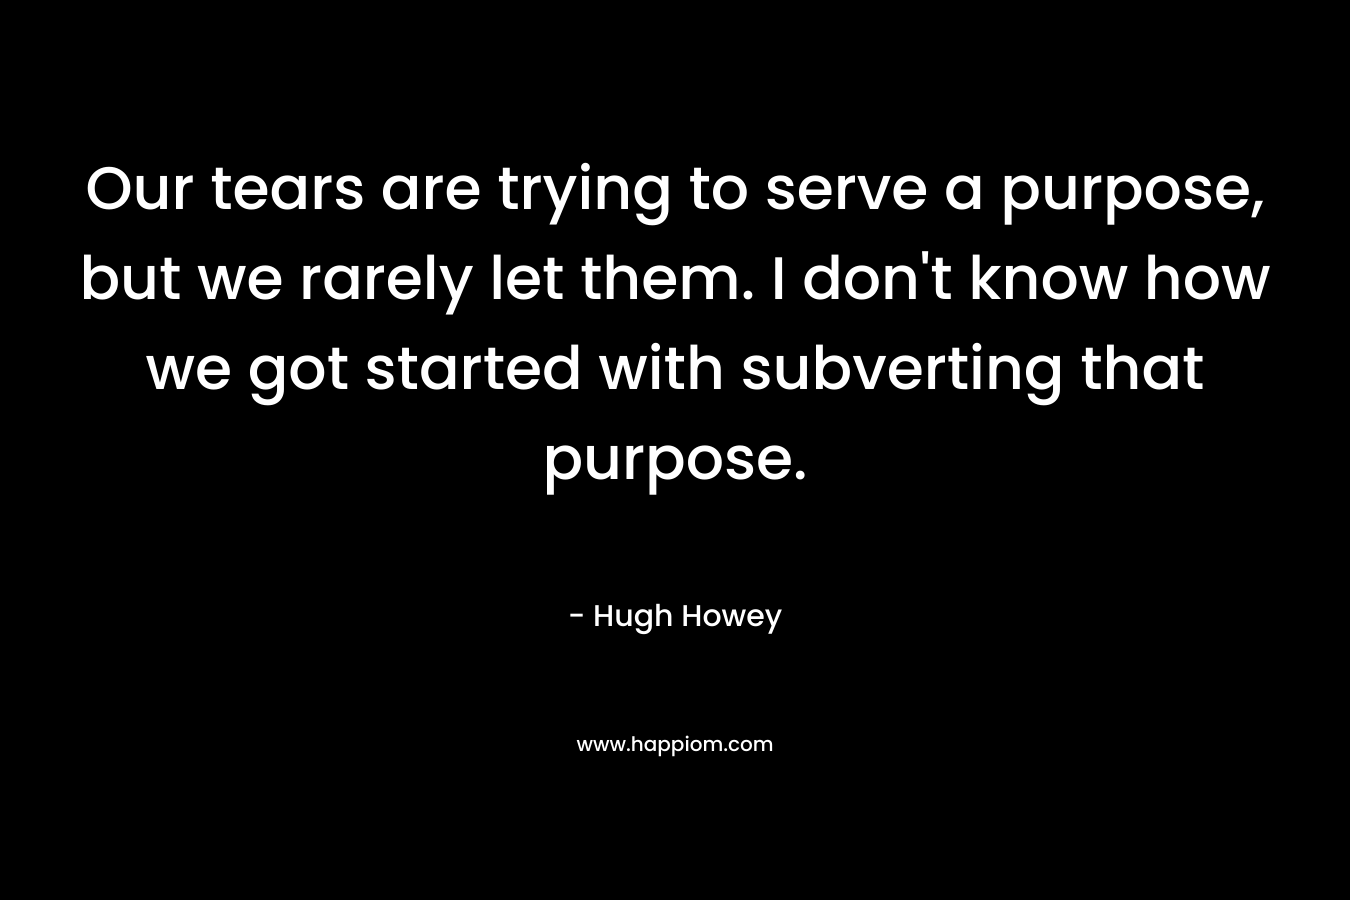 Our tears are trying to serve a purpose, but we rarely let them. I don’t know how we got started with subverting that purpose. – Hugh Howey